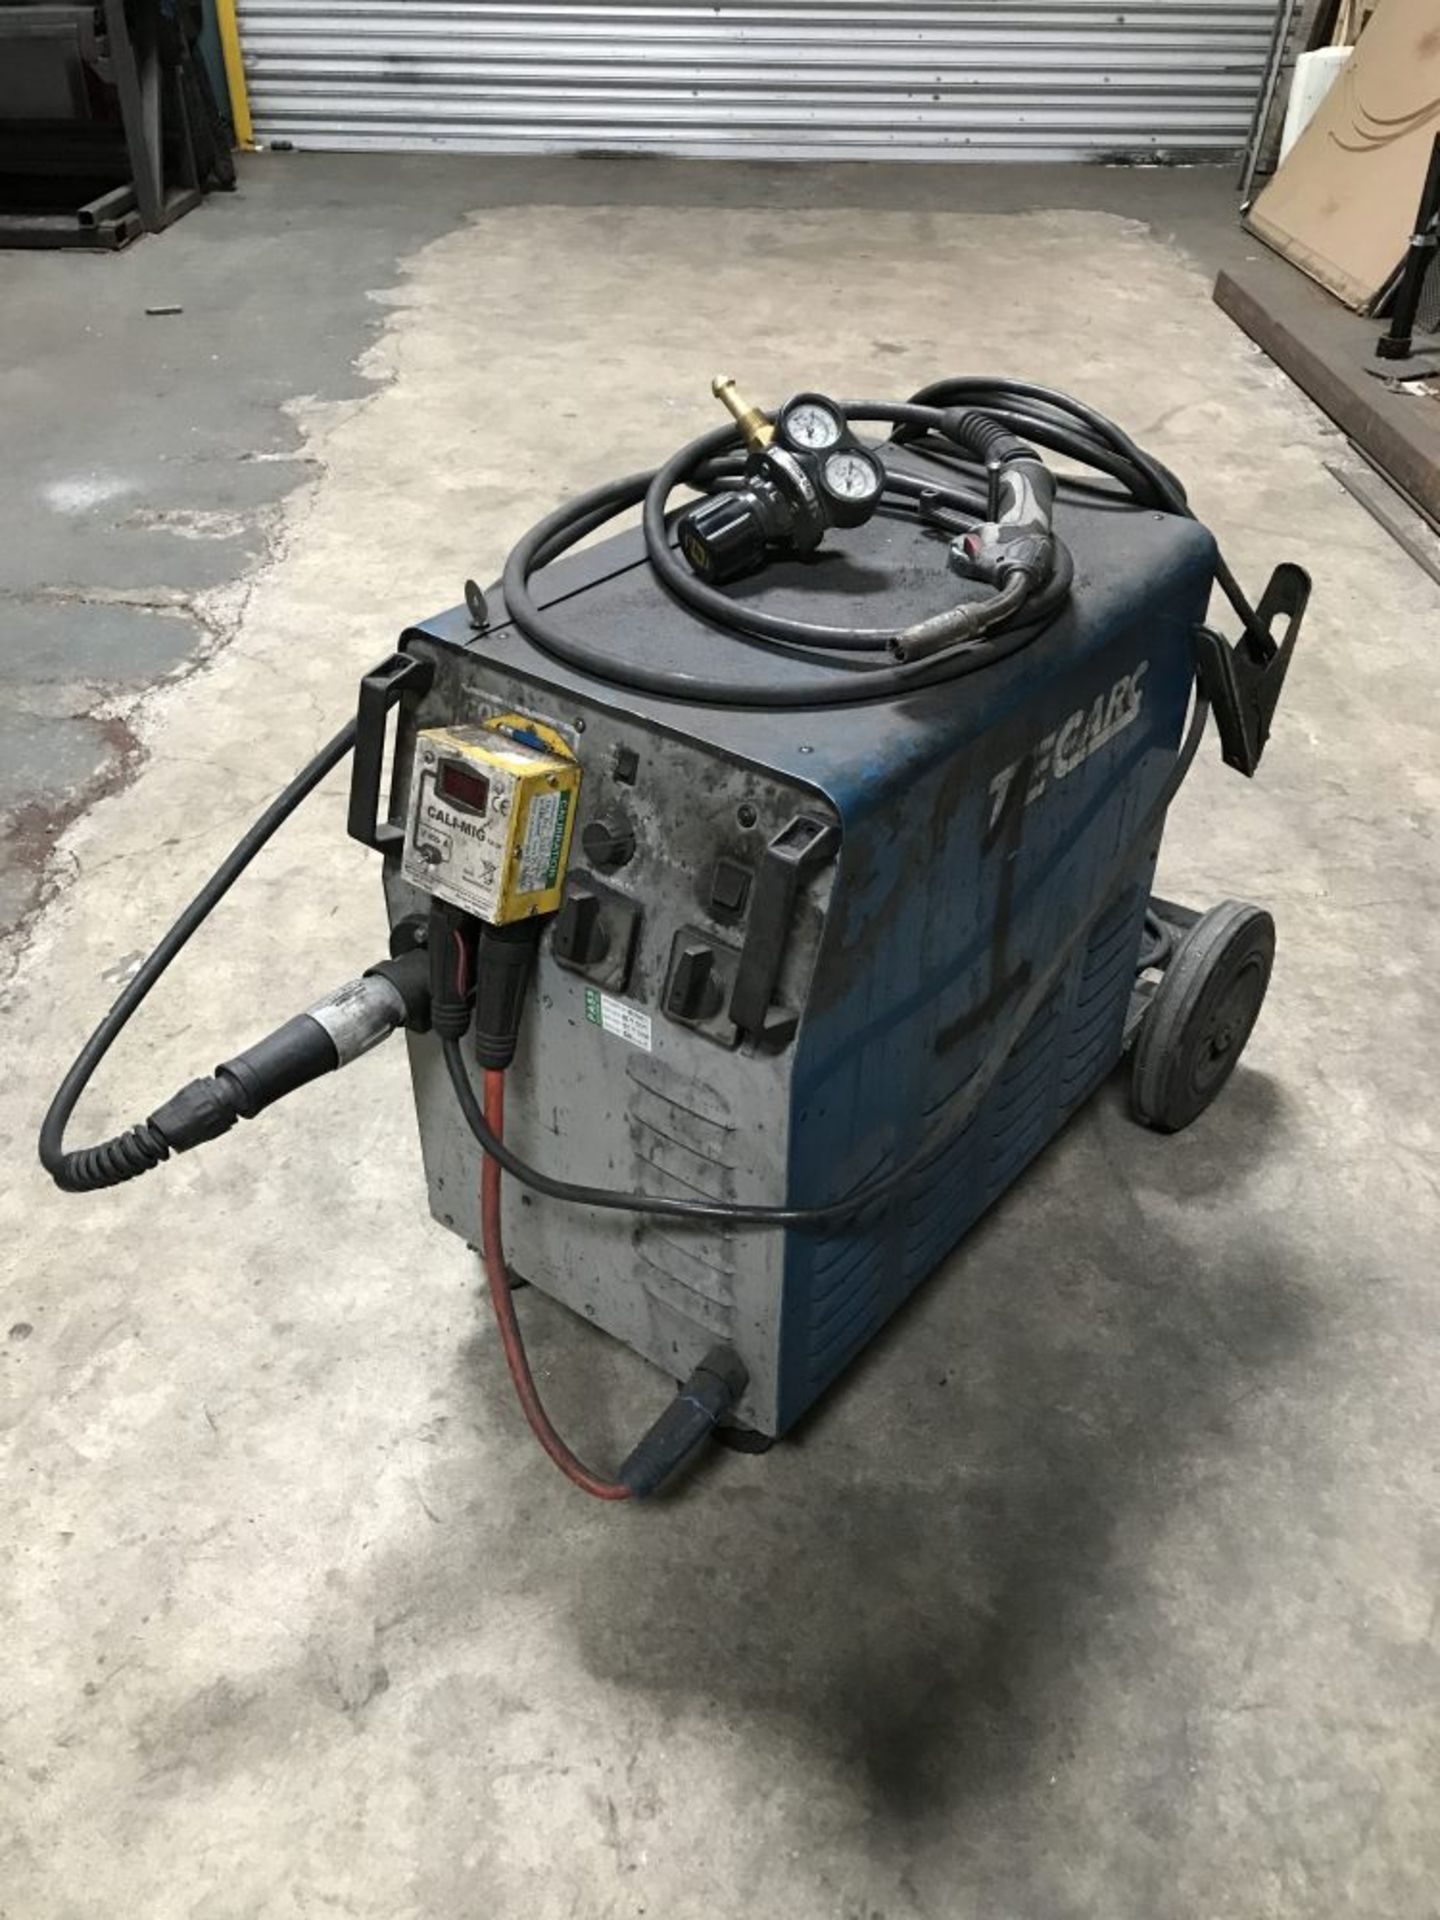 TecArc welding set with regulator, torch, hose and trolley